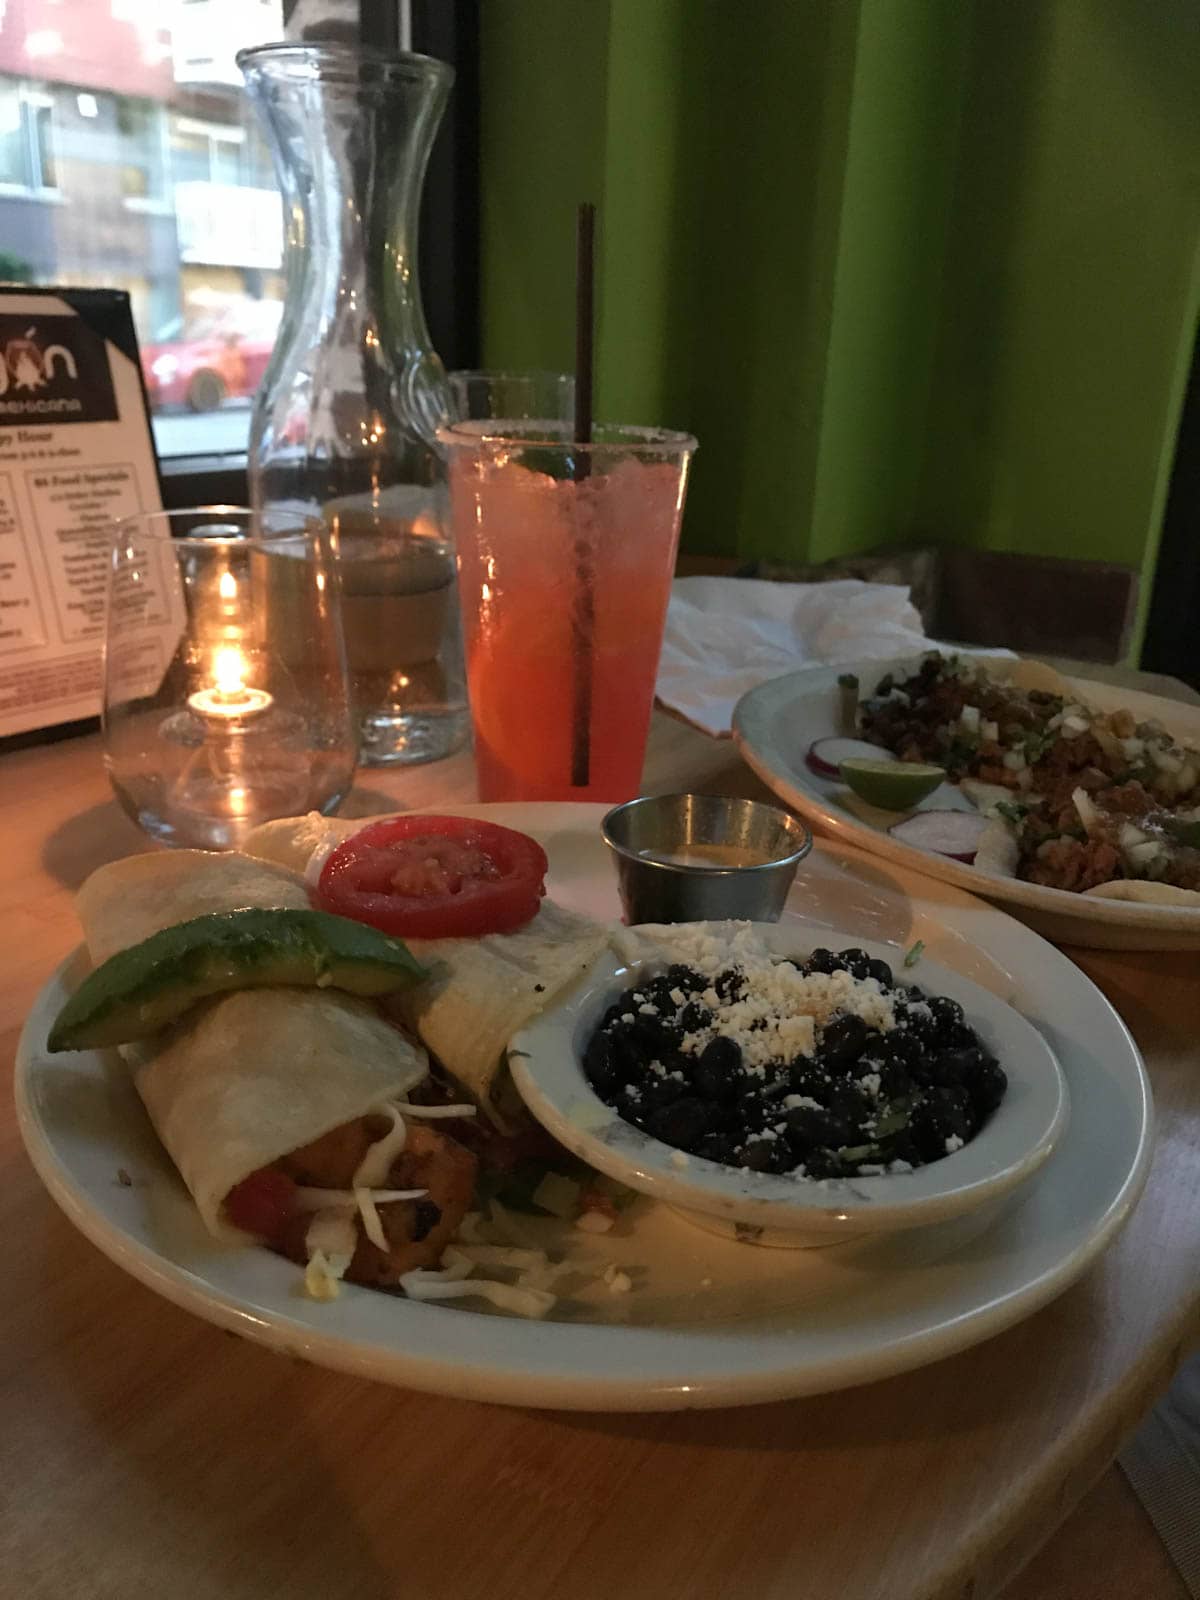 A plate of soft tacos served with black beans, placed on a wooden high table.